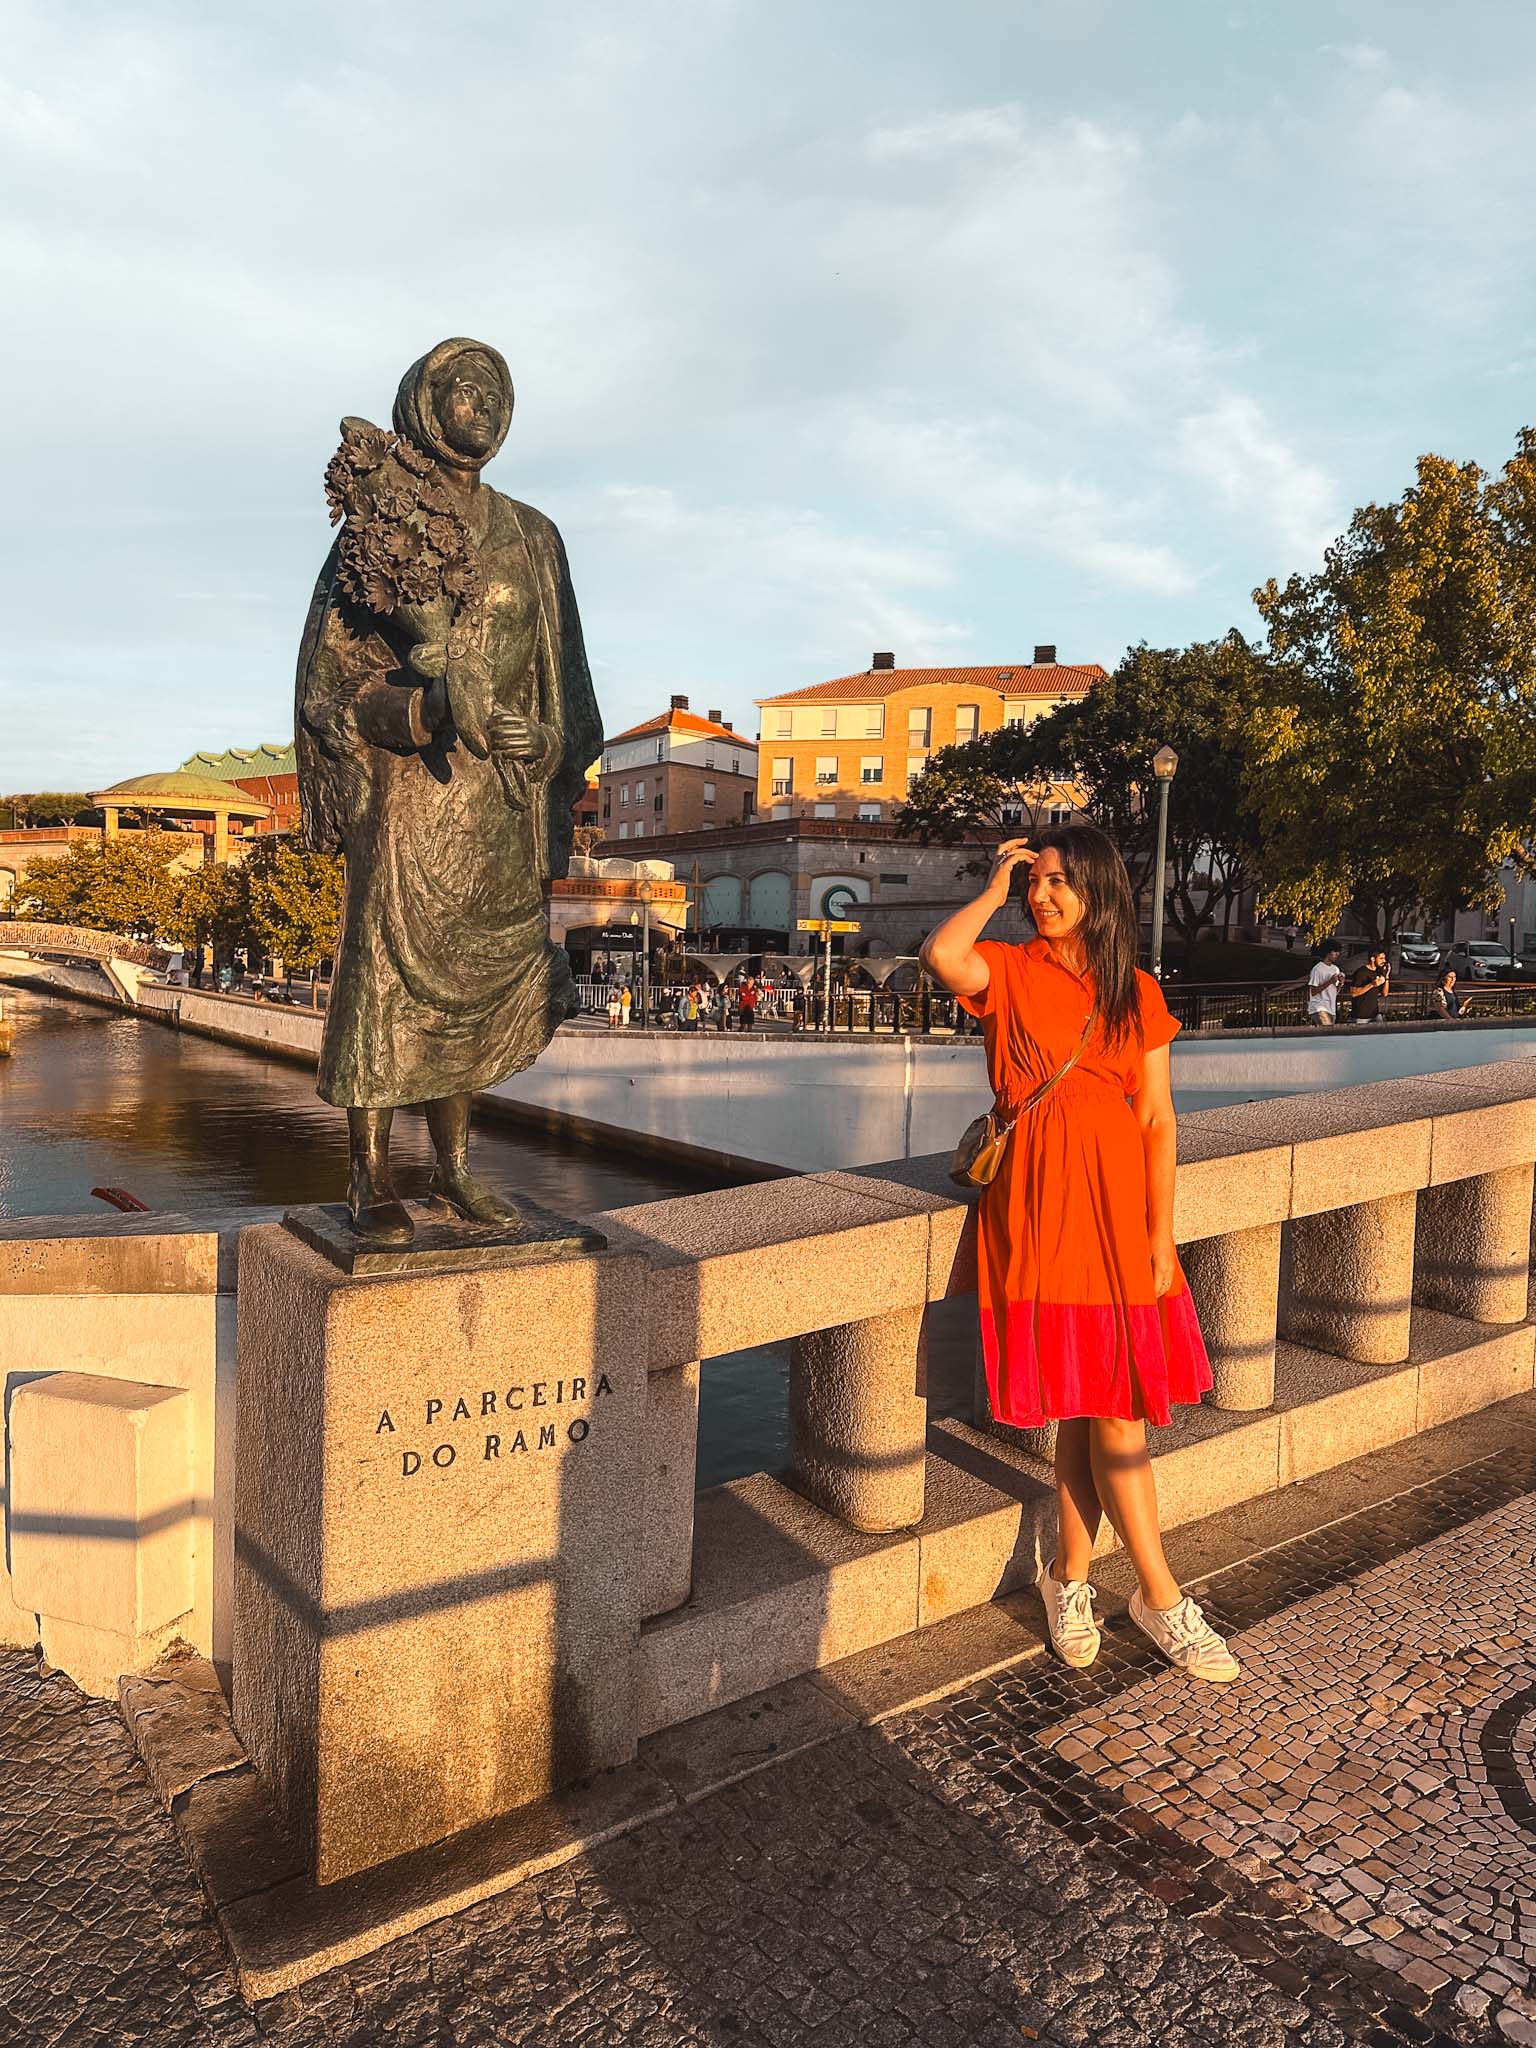 Best things to do in Aveiro - visit the four traditional statues on the bridge